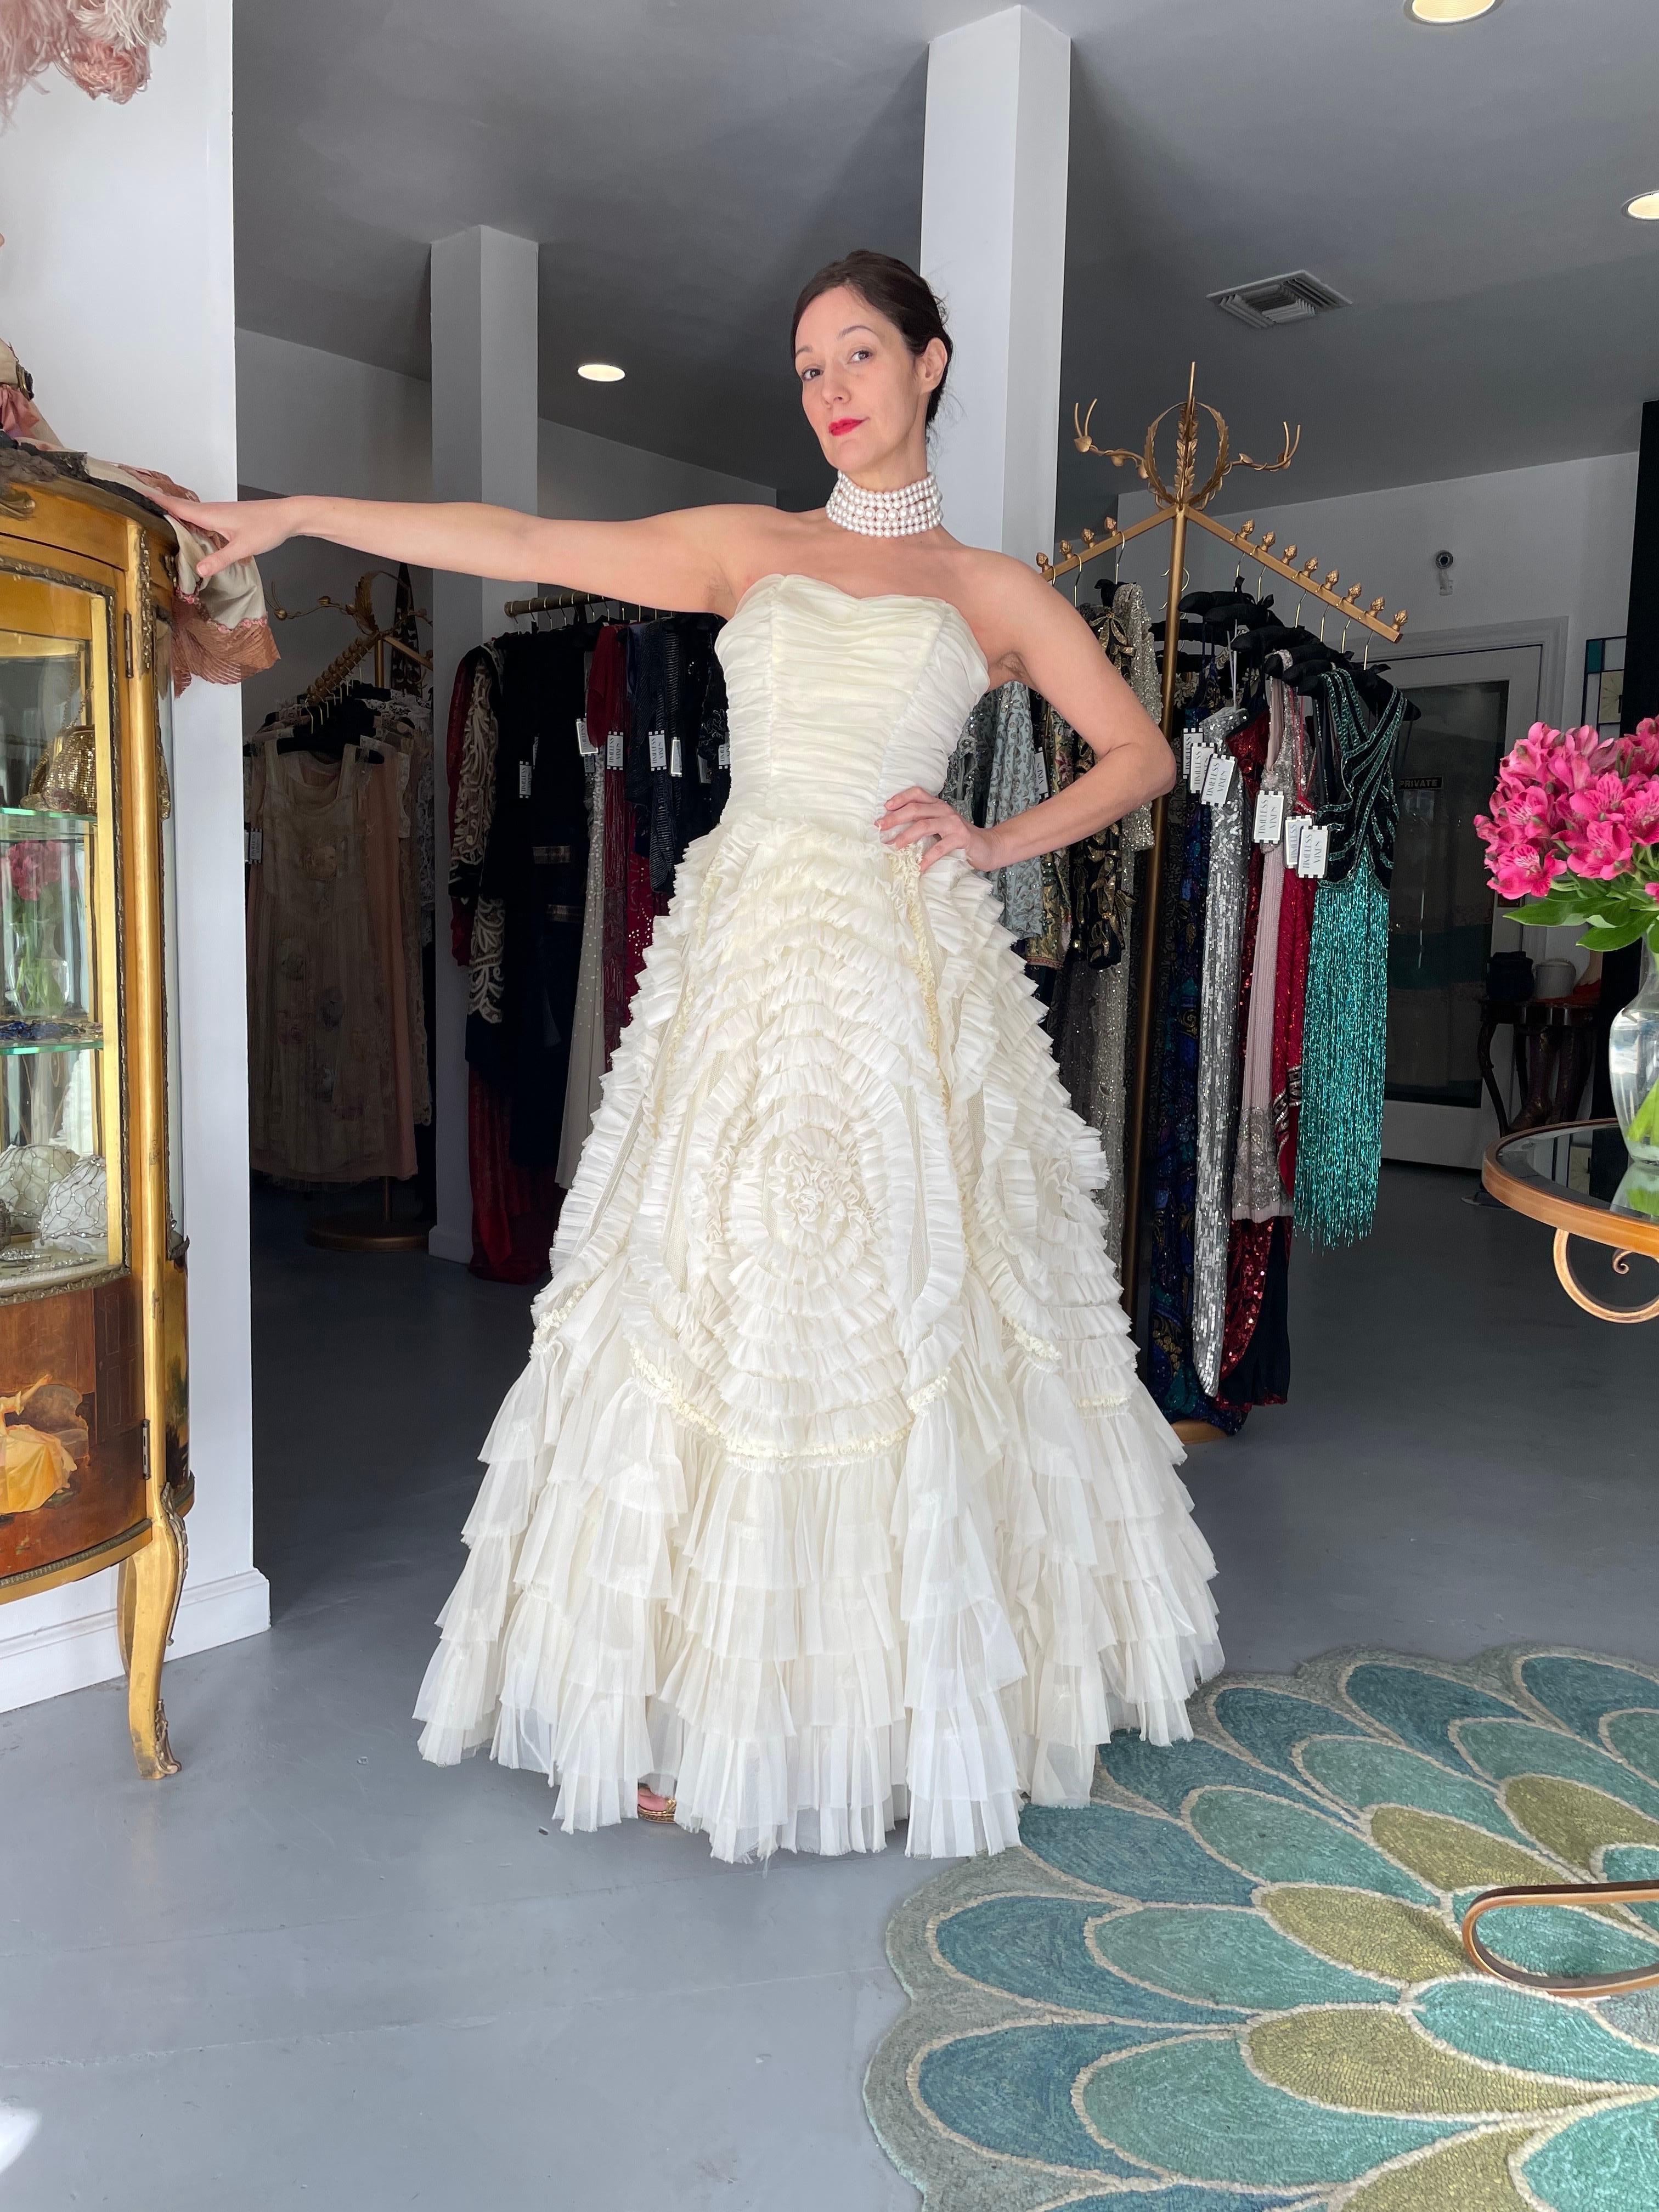 An absolutely breathtaking and ultra rare creamy ivory chiffon strapless full skirted ballgown dating back to the mid 1950's. As you can see, the design was heavily influenced by Christian Dior and any French inspired fashion pieces from this period